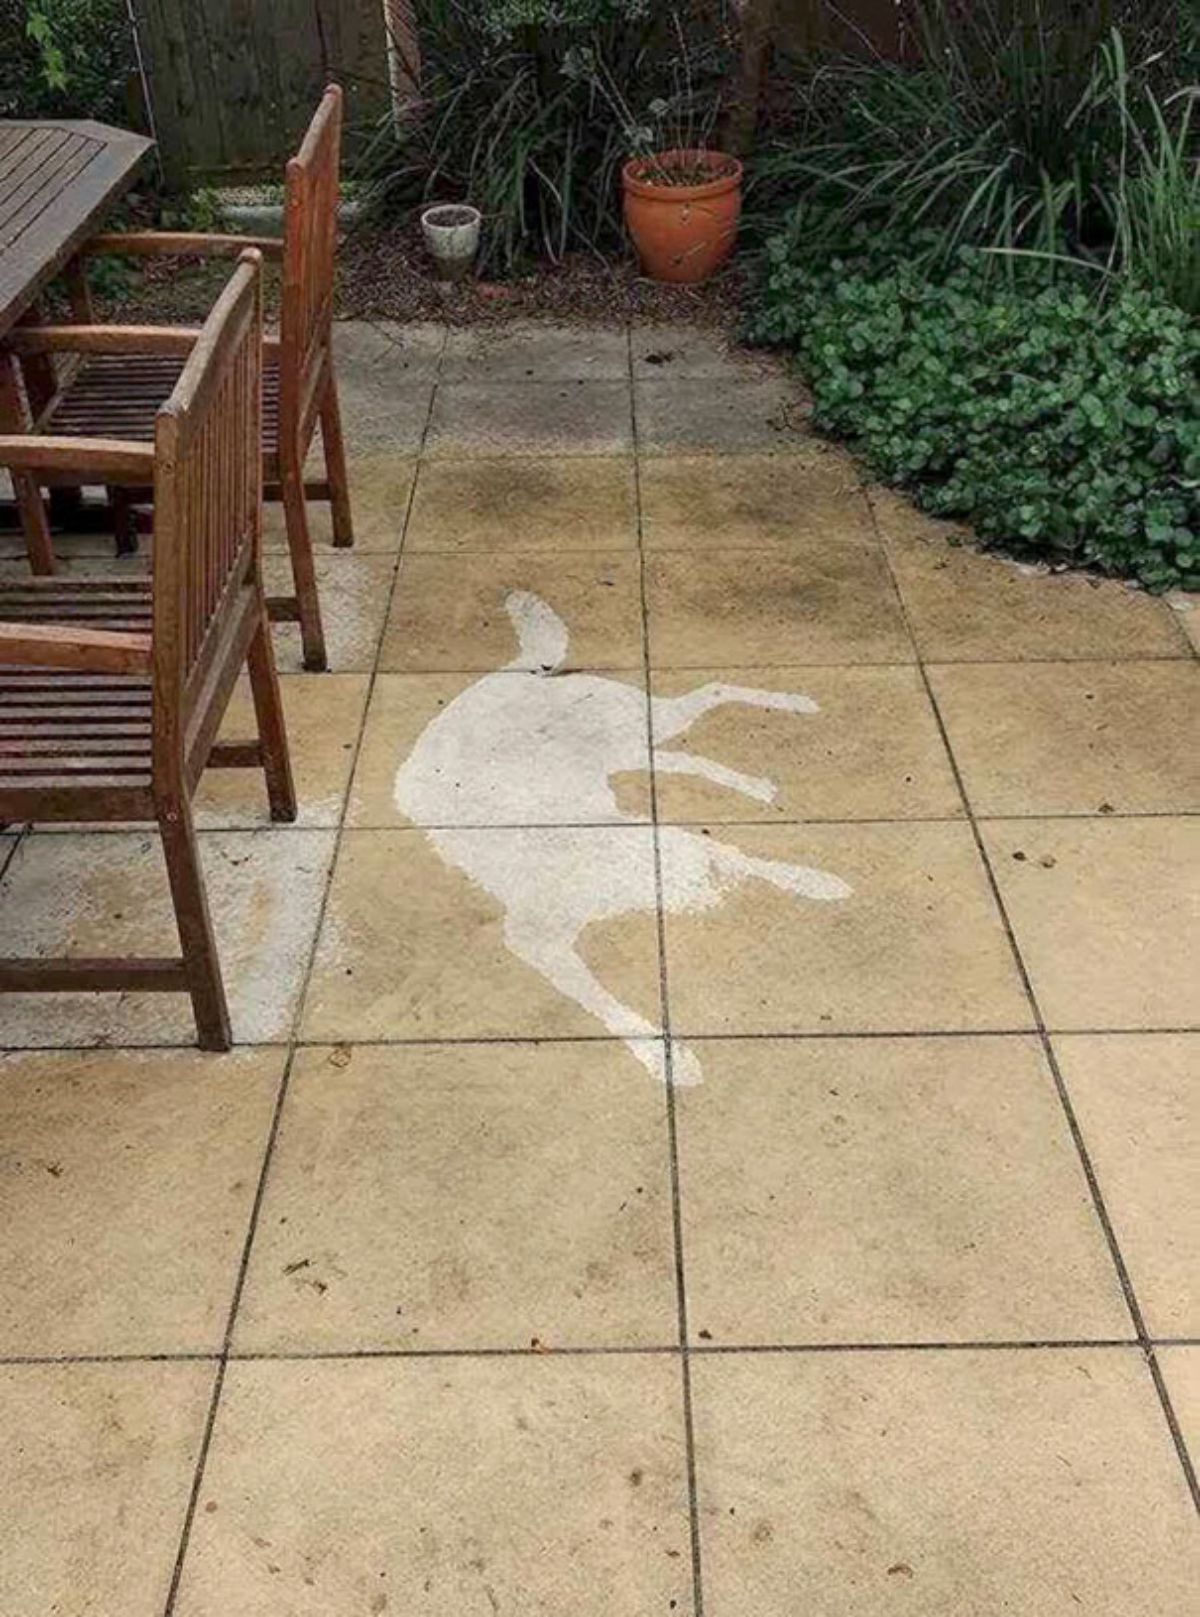 photo of wet white tile in a patio with a dry spot in the shape of a dog laying down